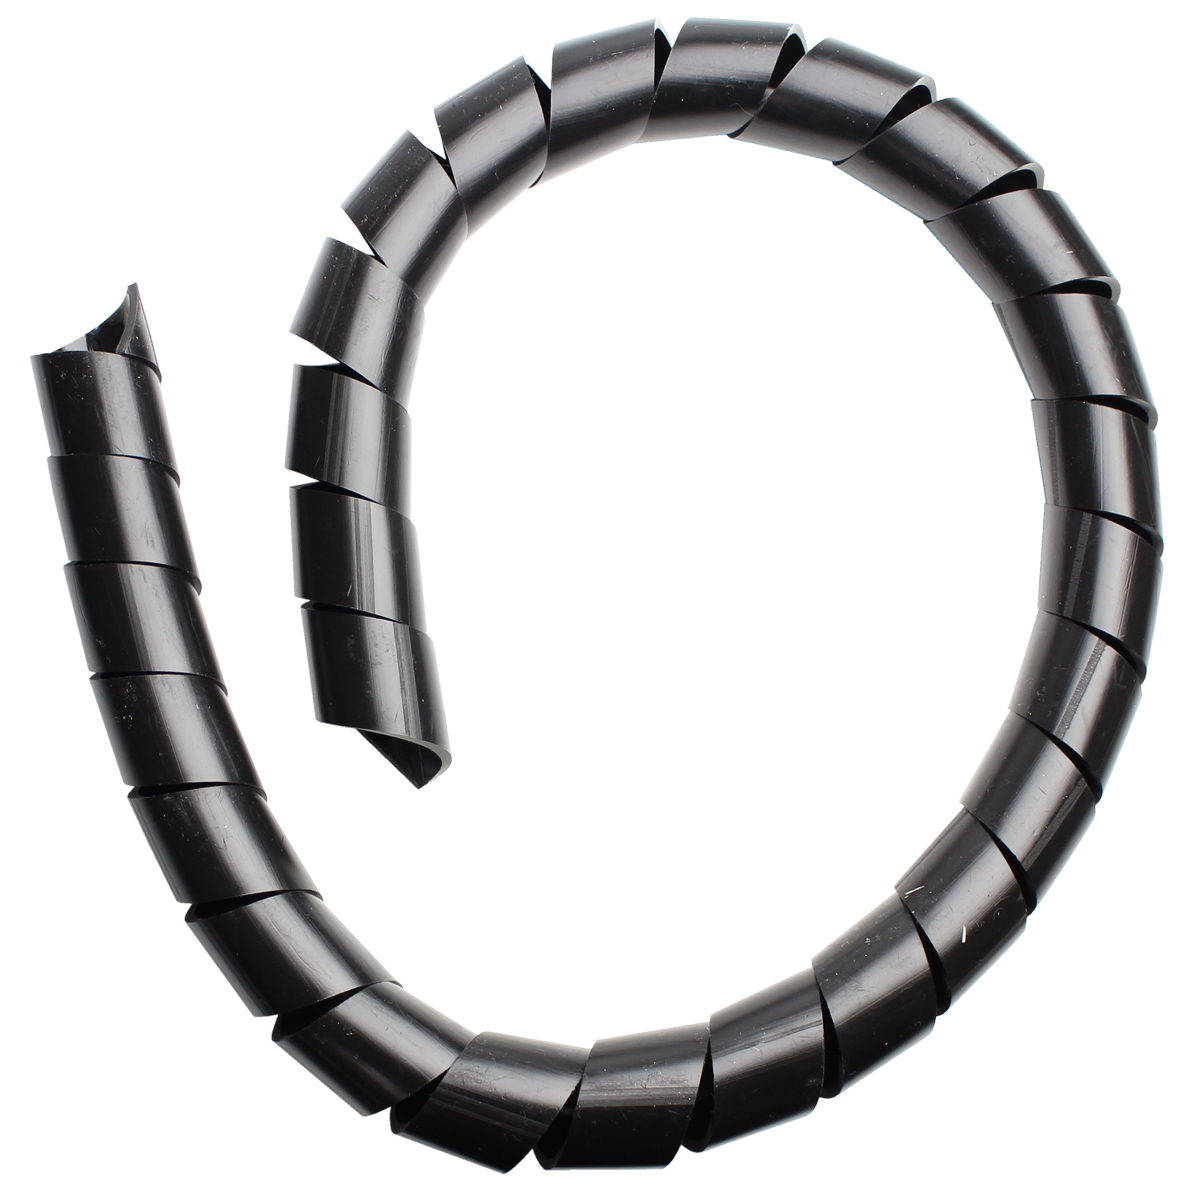 Bend protection for hose ø20-30 mm (0.8-1.2 in.),1 m (39.4 in.)